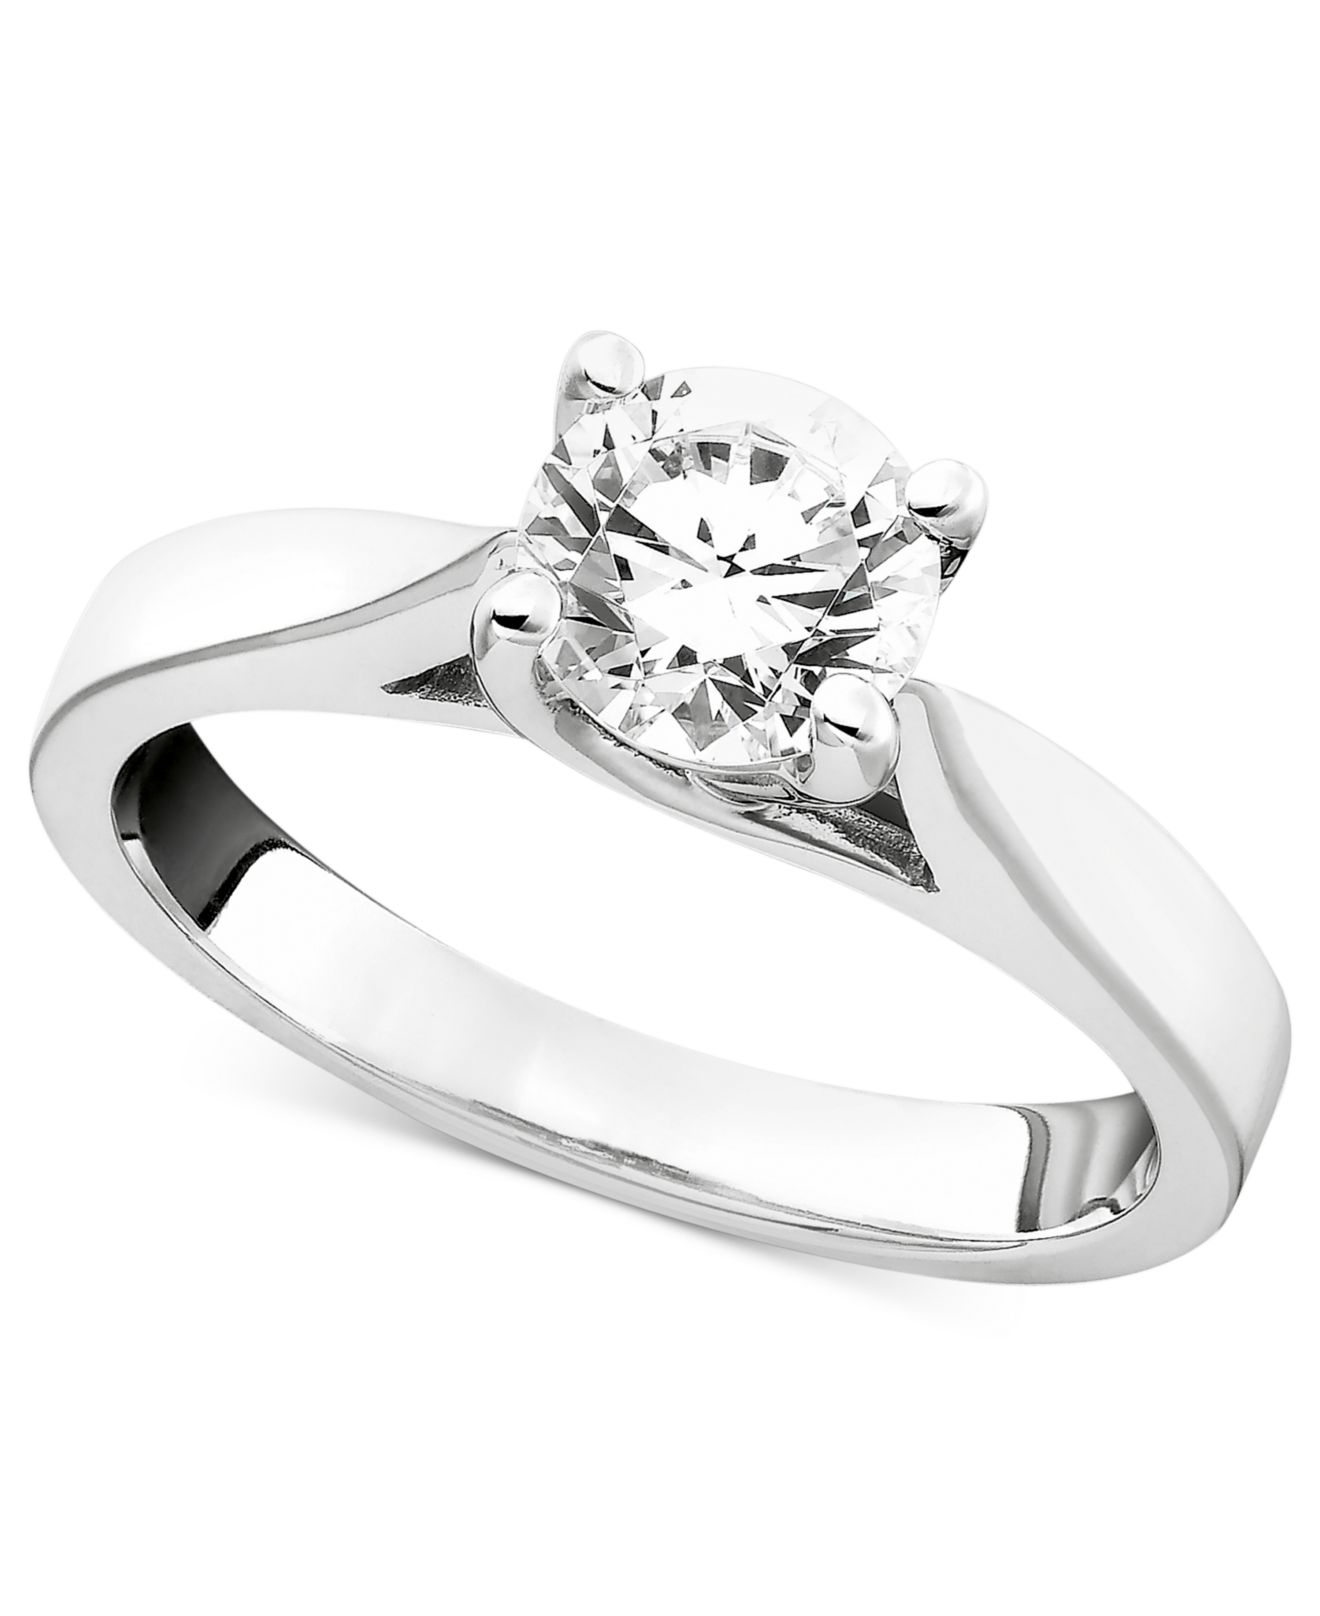  Macy s  Certified Diamond Engagement  Ring  In 14K White  Gold  